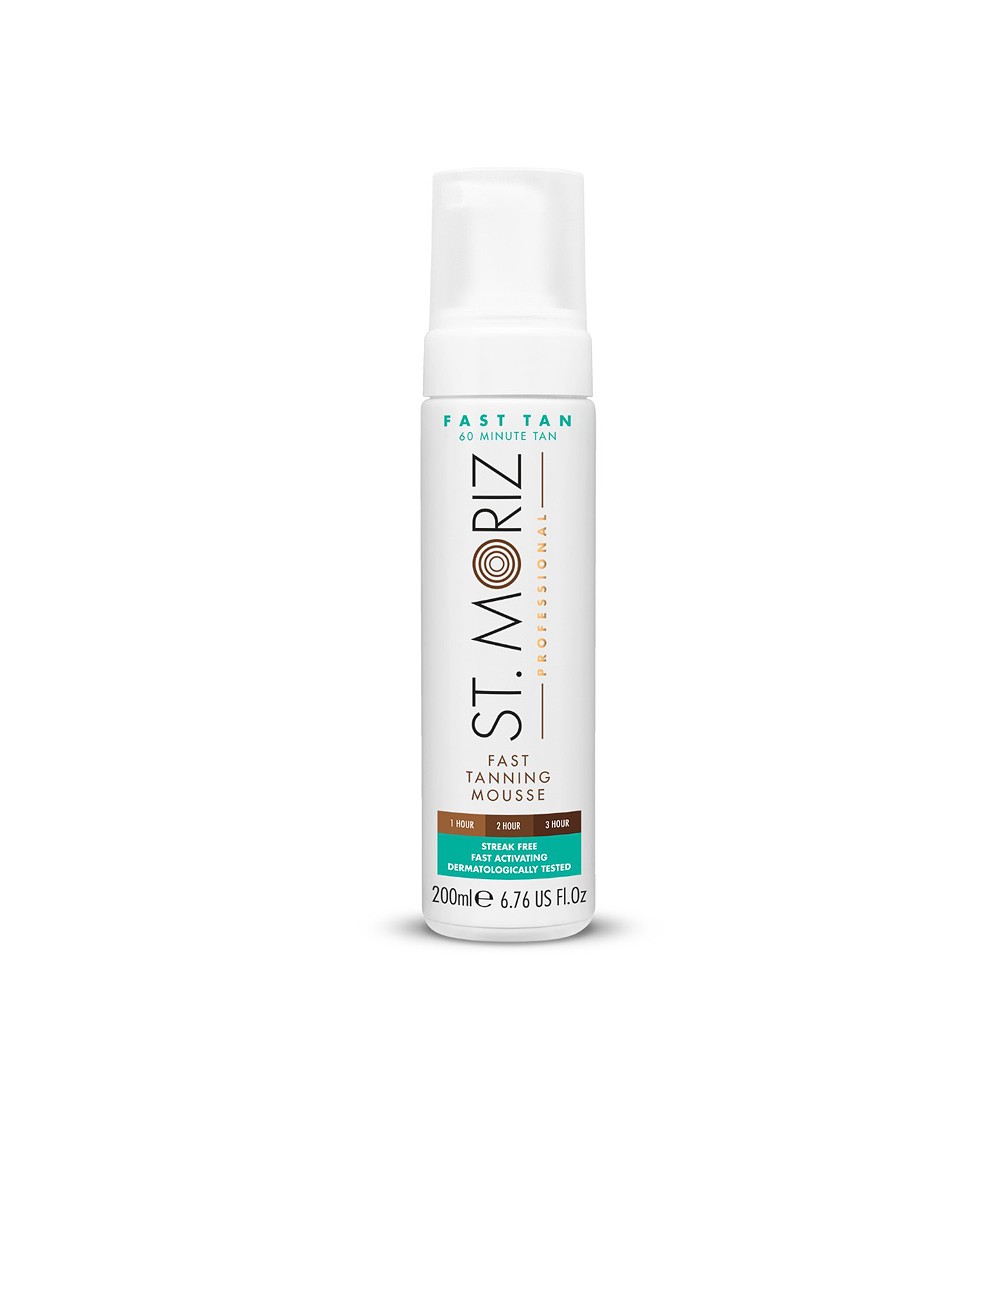 PROFESSIONAL fast tanning mousse 200 ml